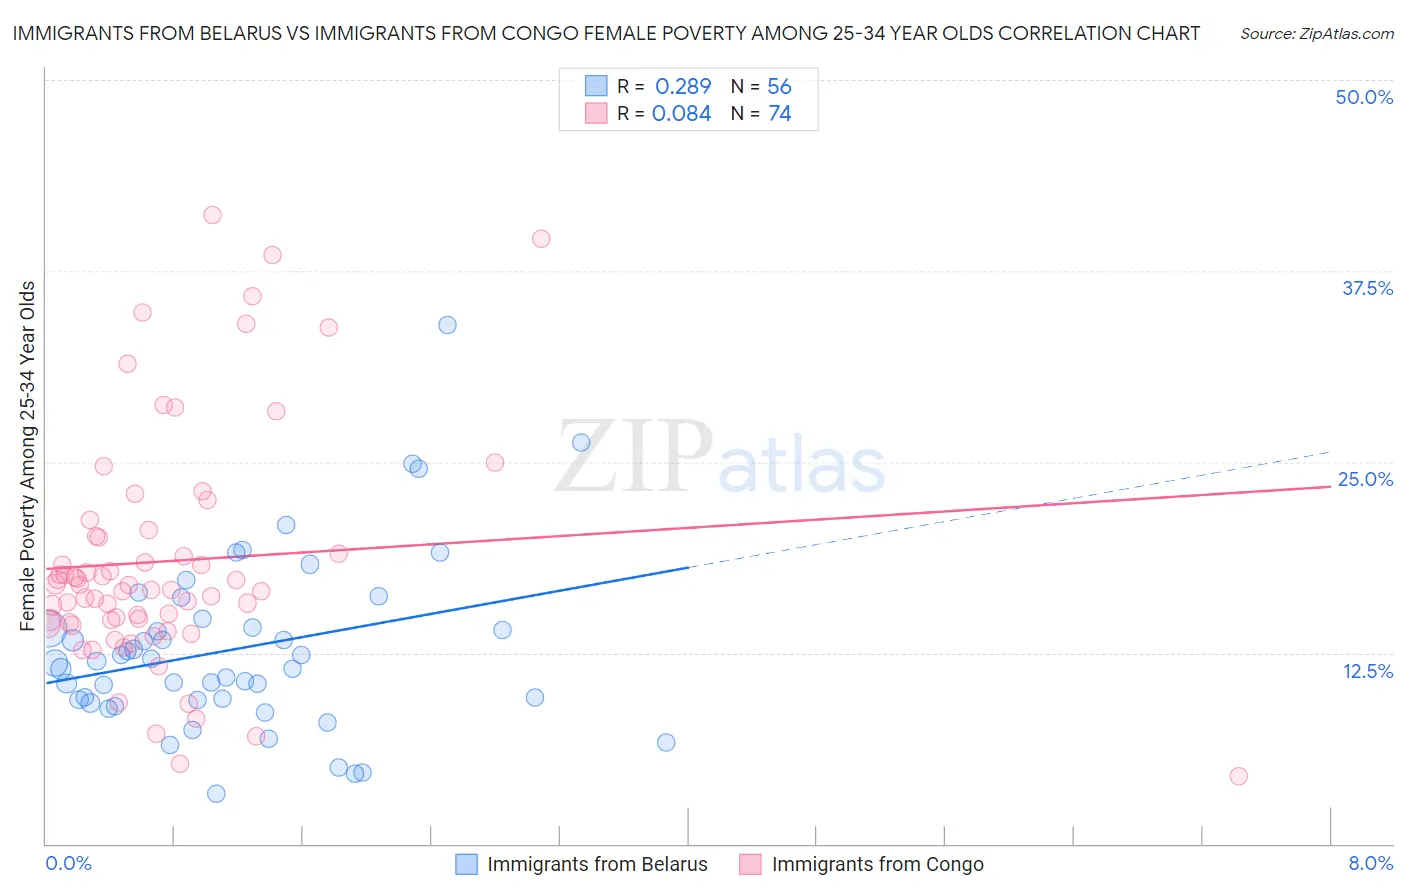 Immigrants from Belarus vs Immigrants from Congo Female Poverty Among 25-34 Year Olds